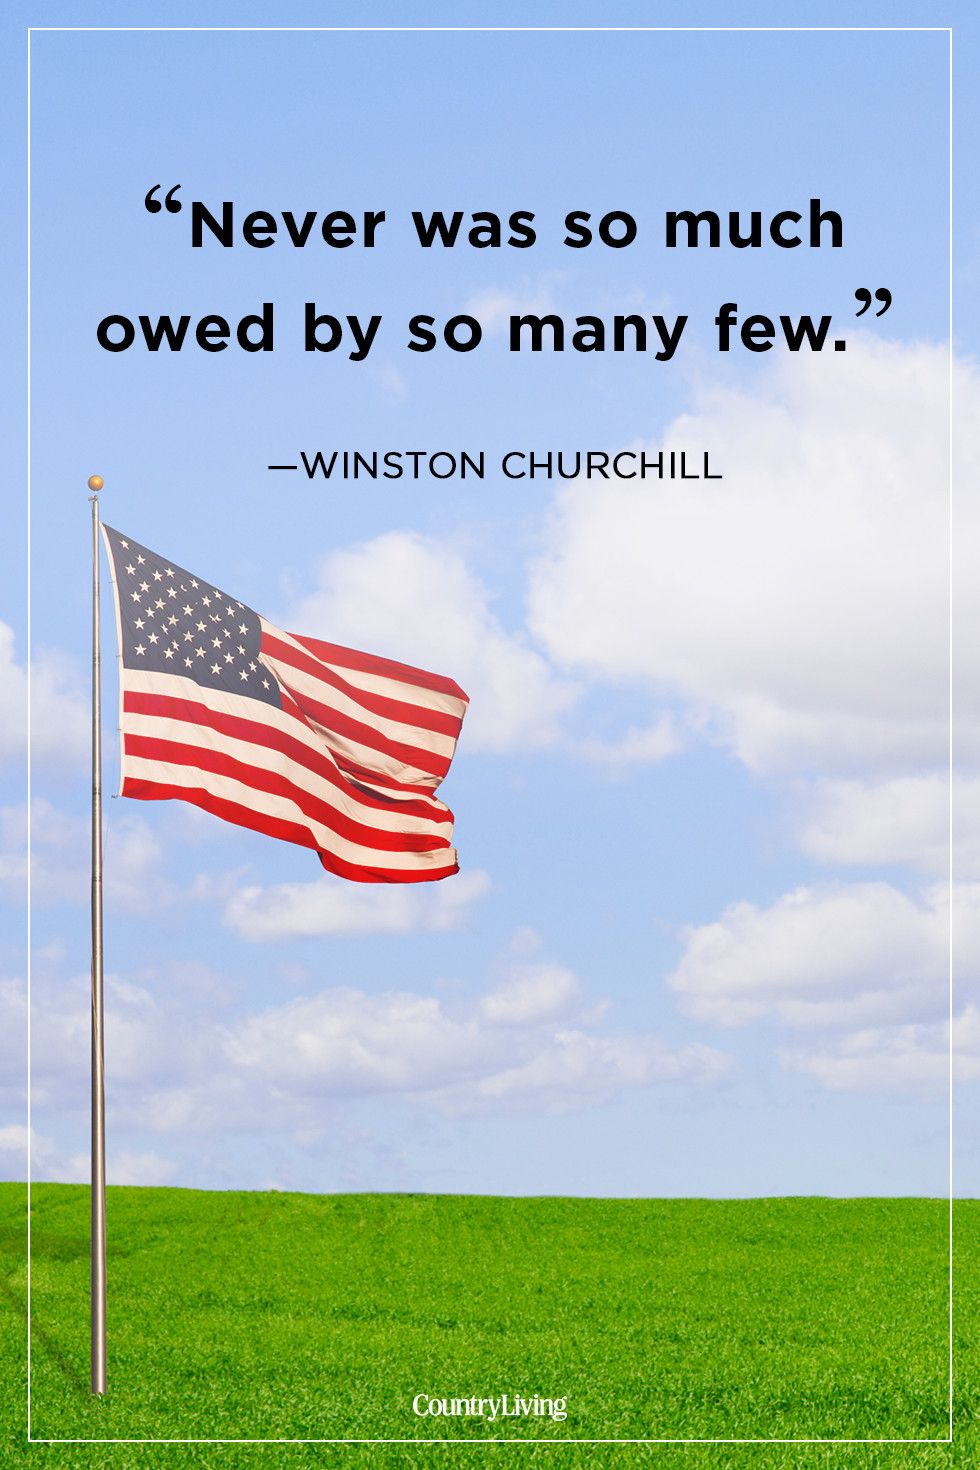 60+ Most Beautiful Memorial Day Quotes And Sayings